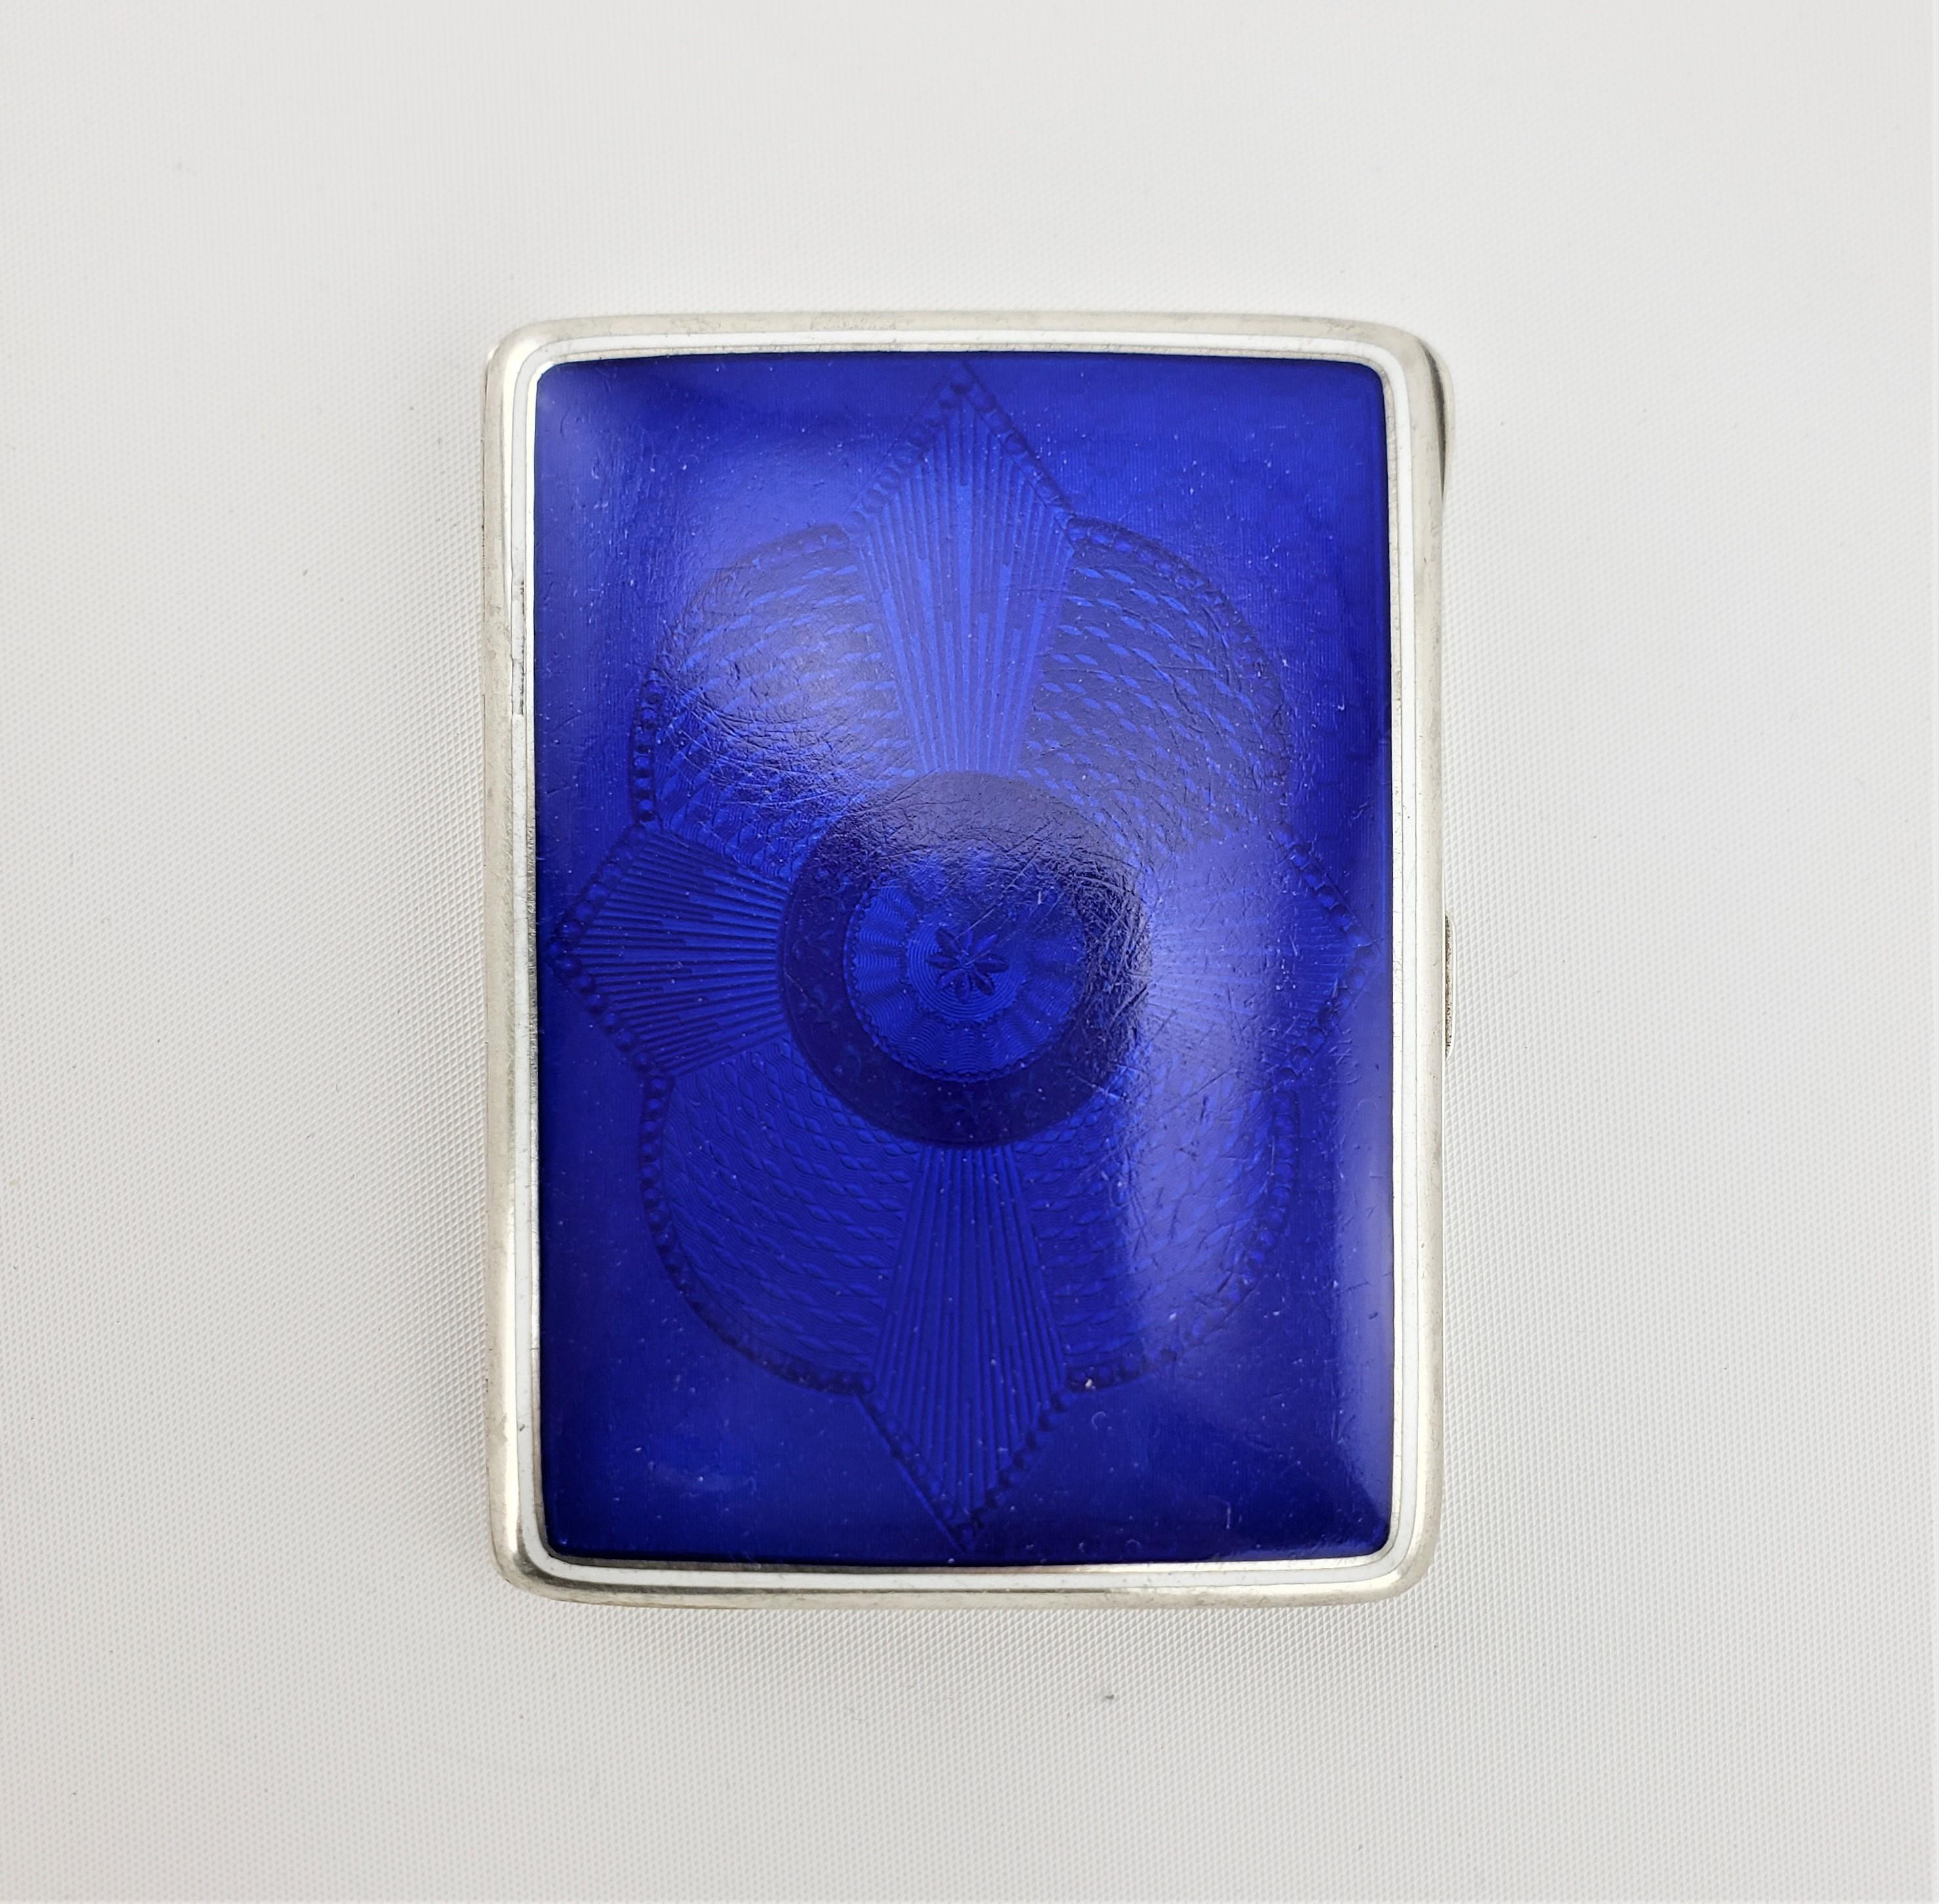 This silver and enamel cigarette case is hallmarked by an unknown maker and is presumed to have been made in Austria in approximately 1920. The case is composed of .830 silver and has a very bright cobalt blue enameled panel on the front with an